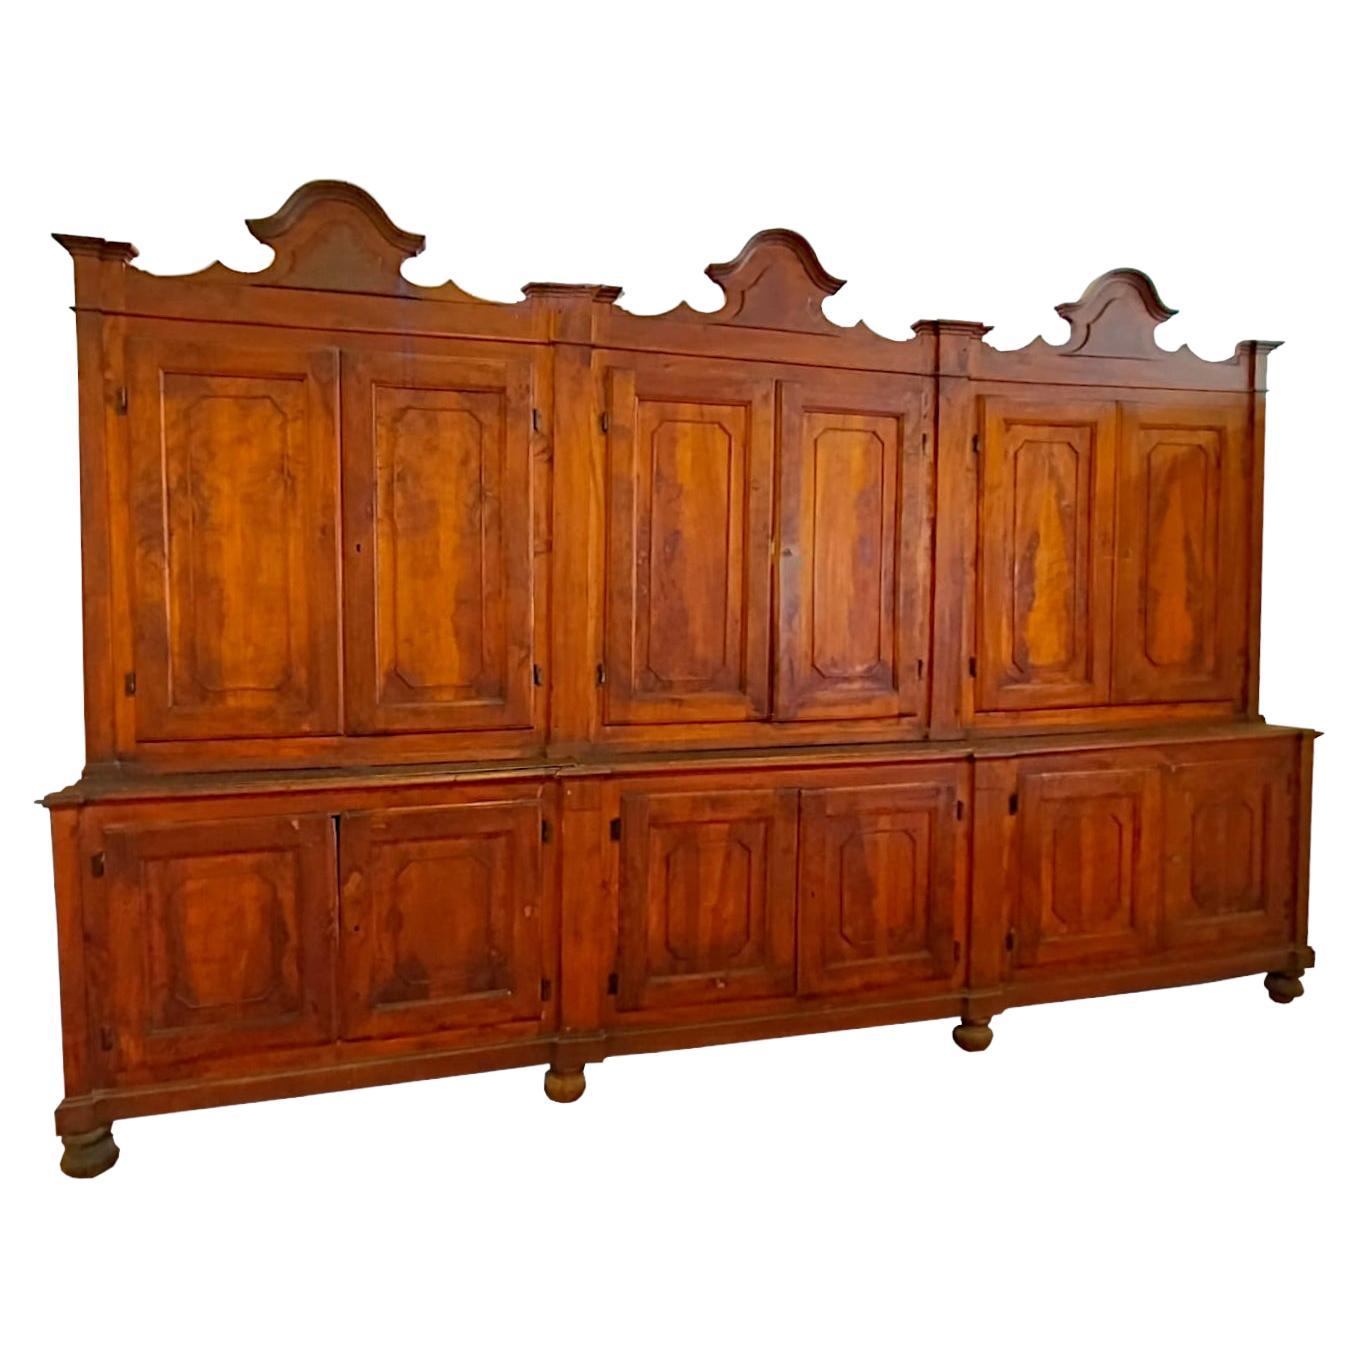 Large Bookcase, 12 Door Archive, Italy Mid-19th Century For Sale